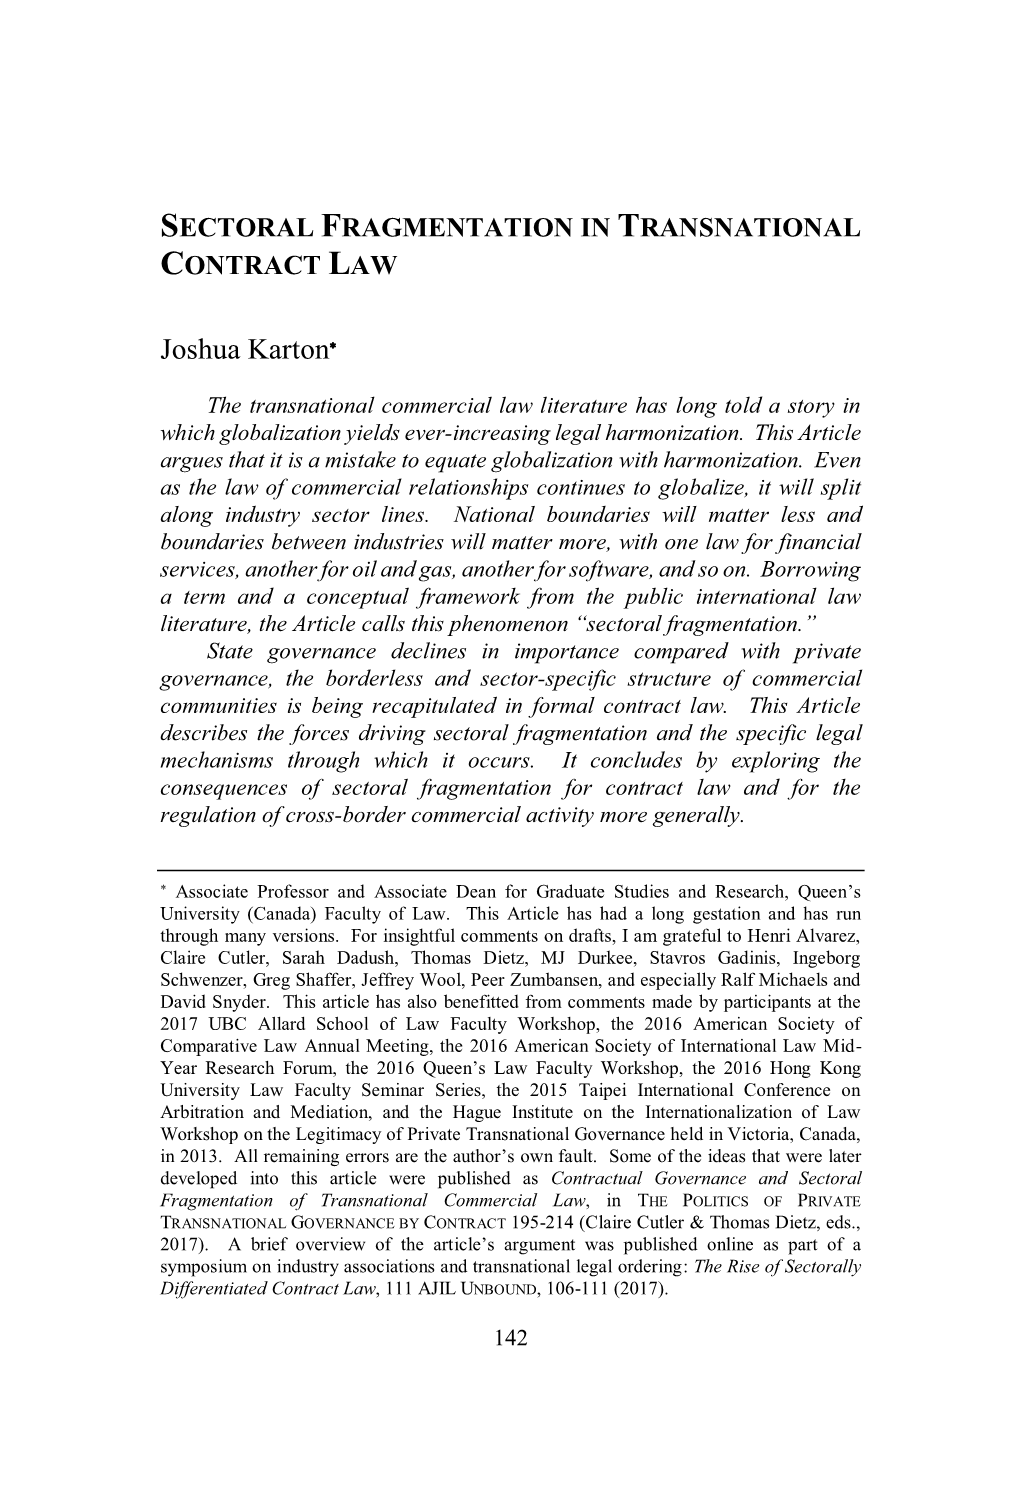 Sectoral Fragmentation in Transnational Contract Law